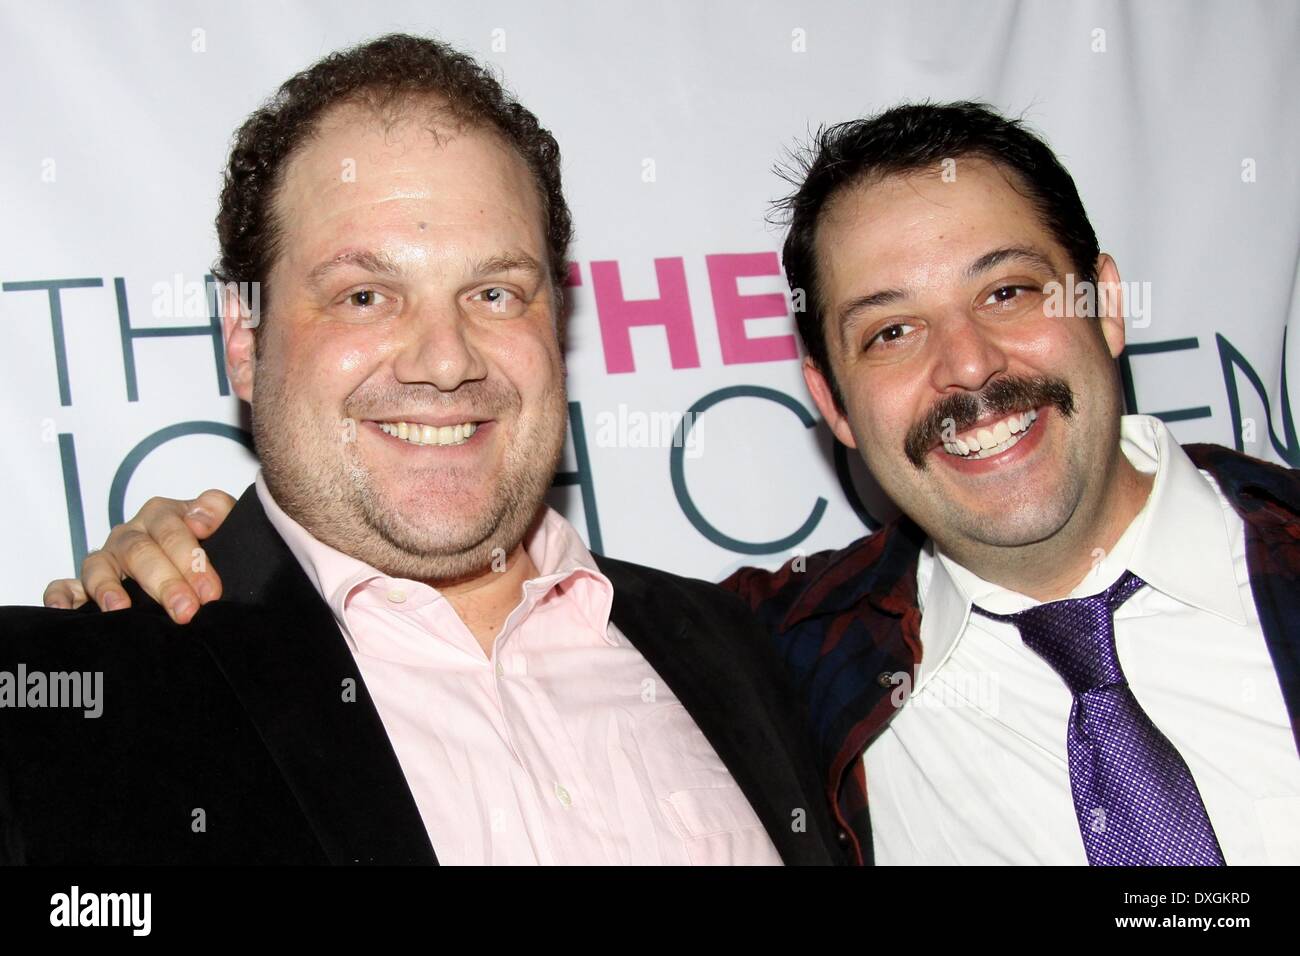 Jordan Gelber and Steve Rosen Opening night party for the comedy 'The Other  Josh Cohen' at the SoHo Playhouse. Where: New York Stock Photo - Alamy